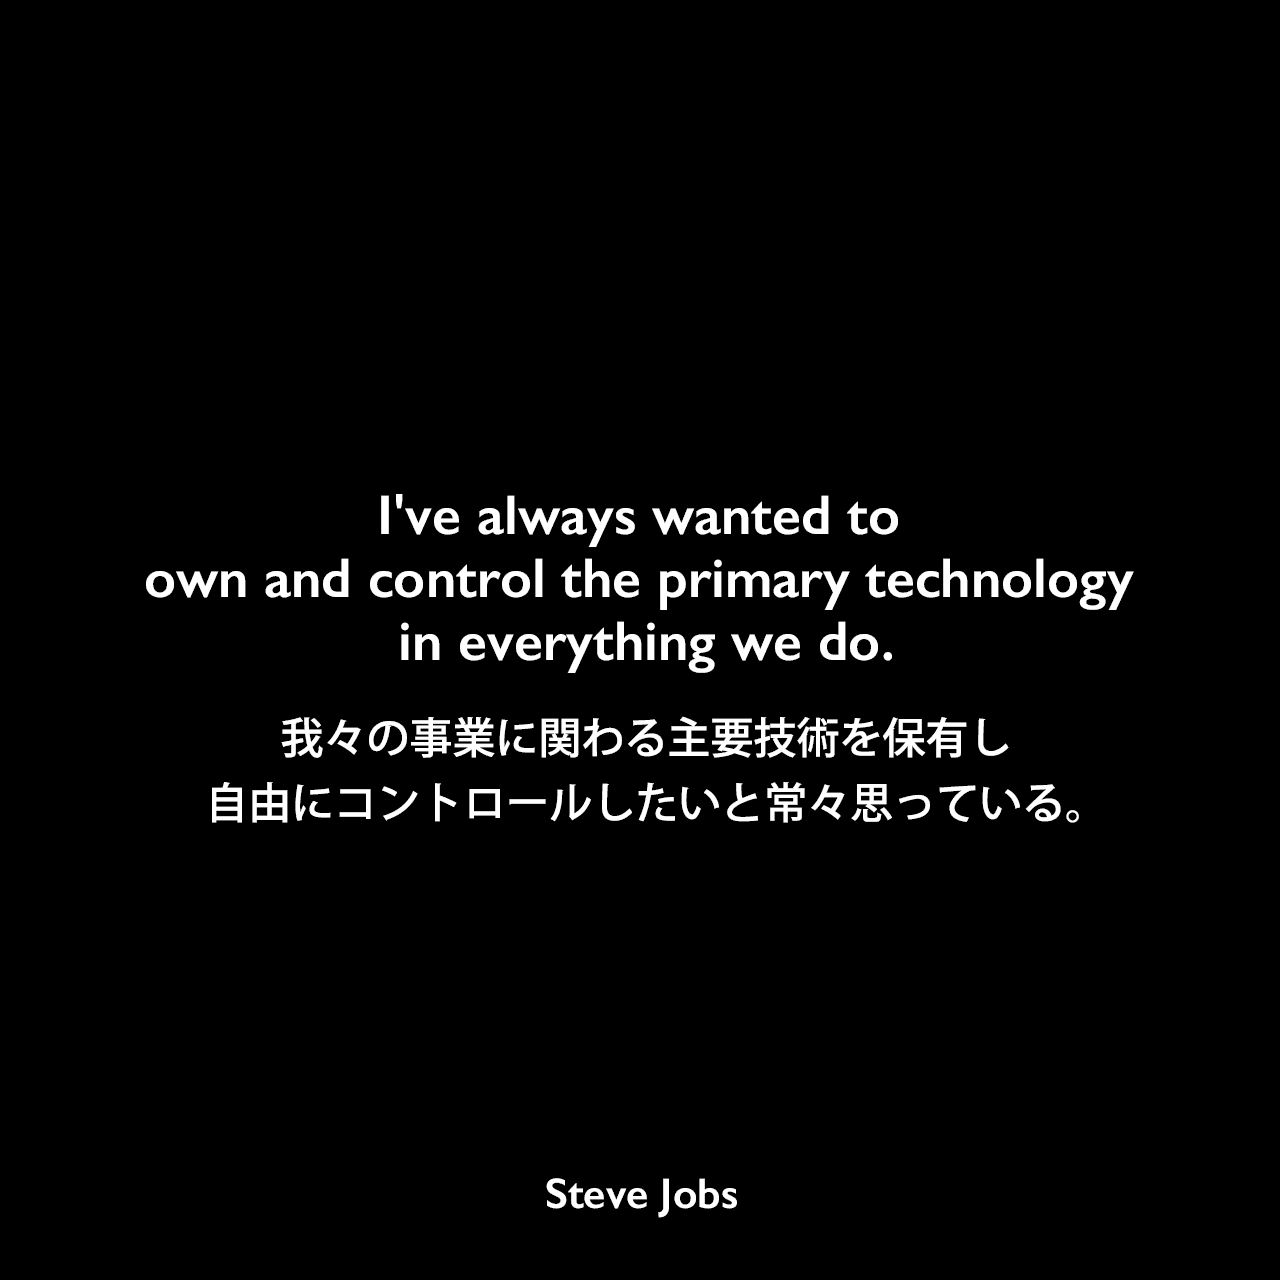 I've always wanted to own and control the primary technology in everything we do.我々の事業に関わる主要技術を保有し、自由にコントロールしたいと常々思っている。- 2004年10月12日 BusinessWeekでのコメントSteve Jobs